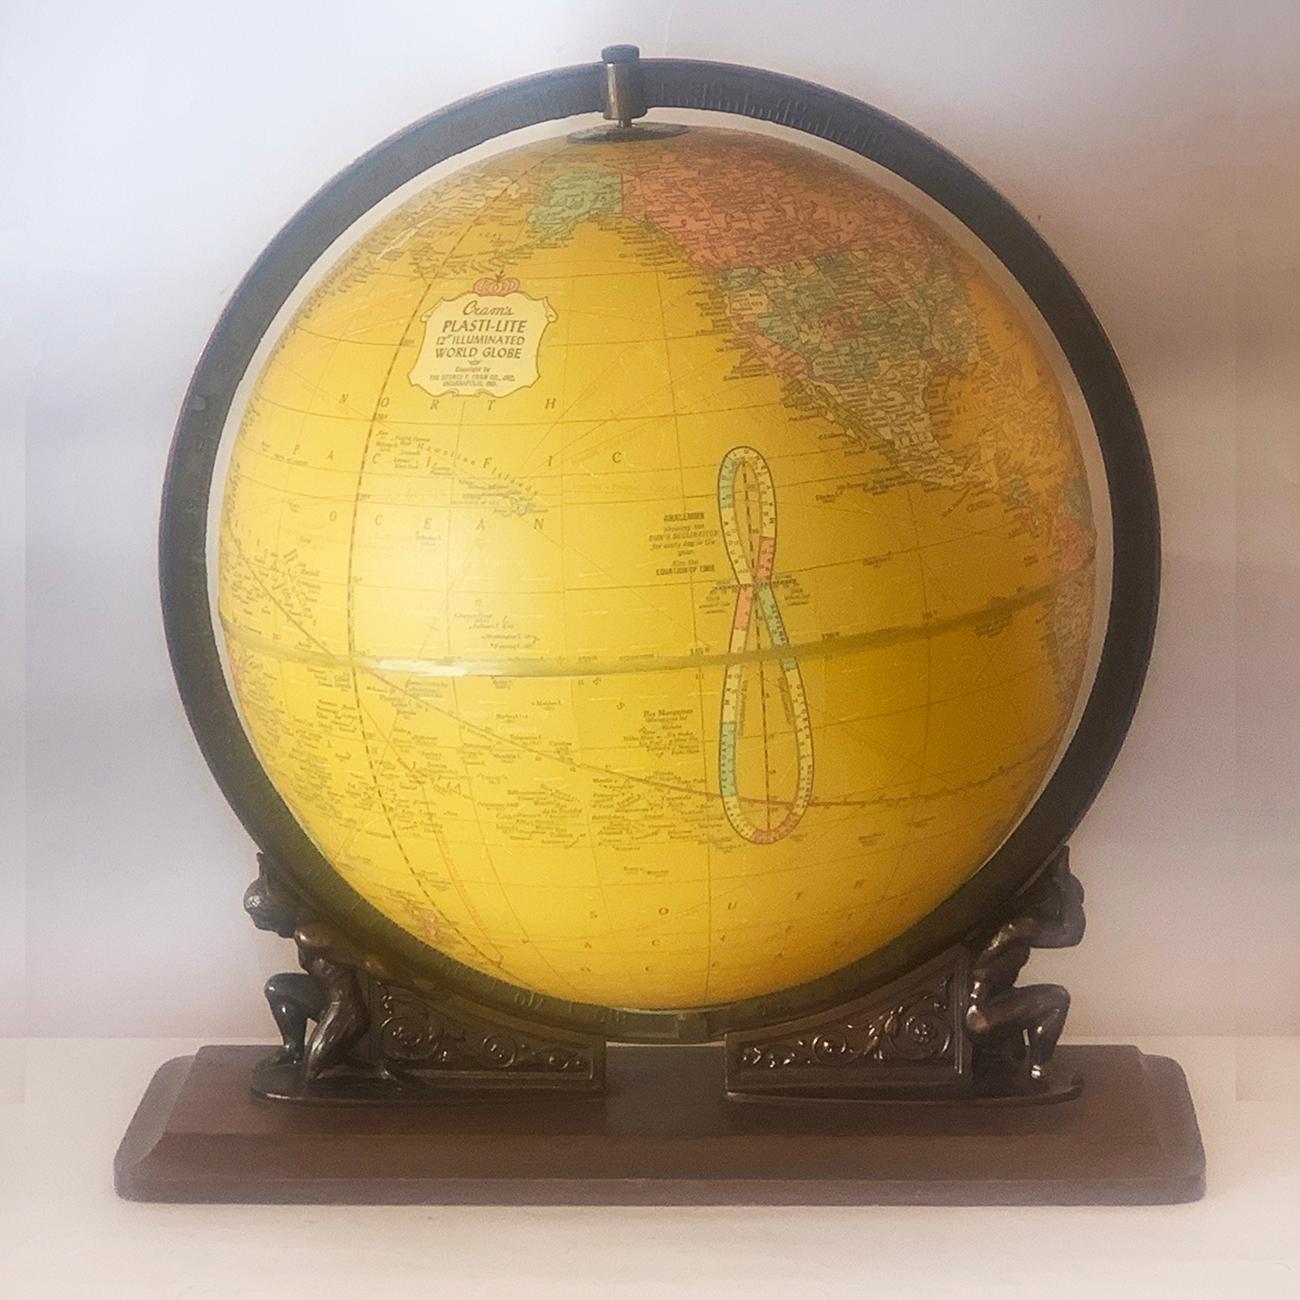 Crams World Globe, internally Illuminated, Resting on Atlas’s shoulders. Midcentury, excellent condition, totally re-wired to Australian requirements, and no damage to mention. Slight aged patina, and at the “North Pole”, there is the 24 hour,